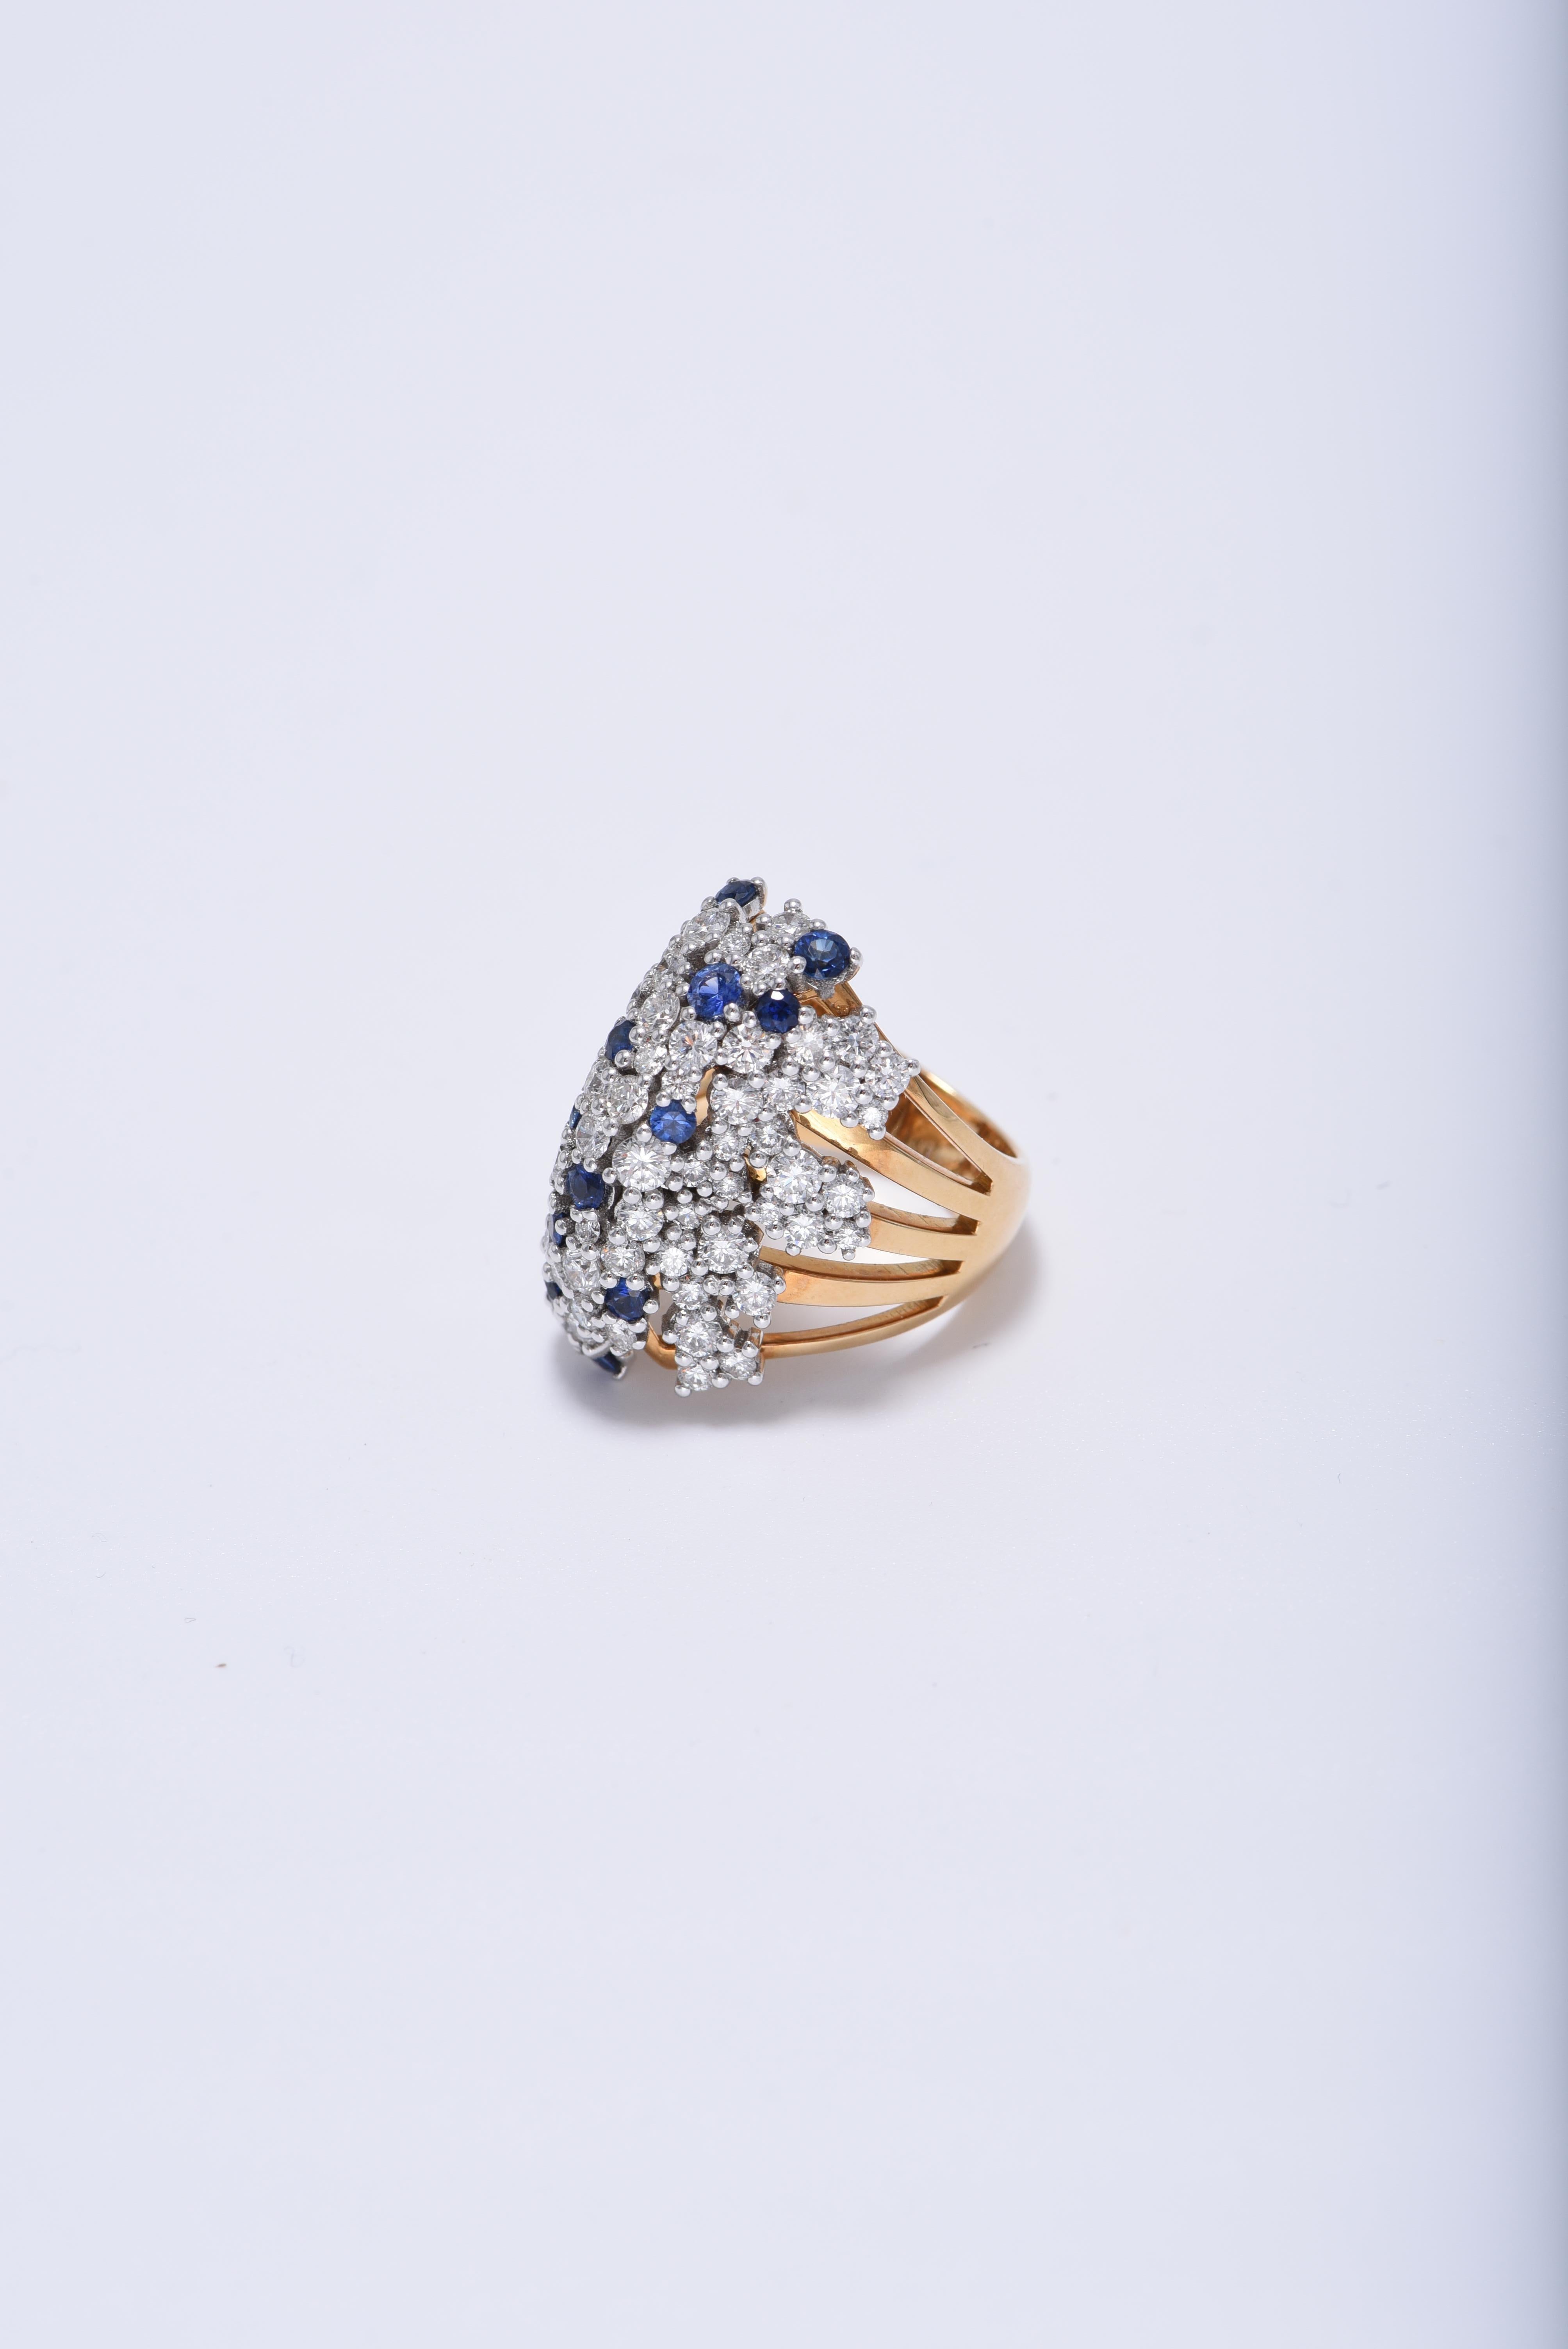 For Sale:  18K Gold, White Diamond, and Blue Sapphire Ring 3